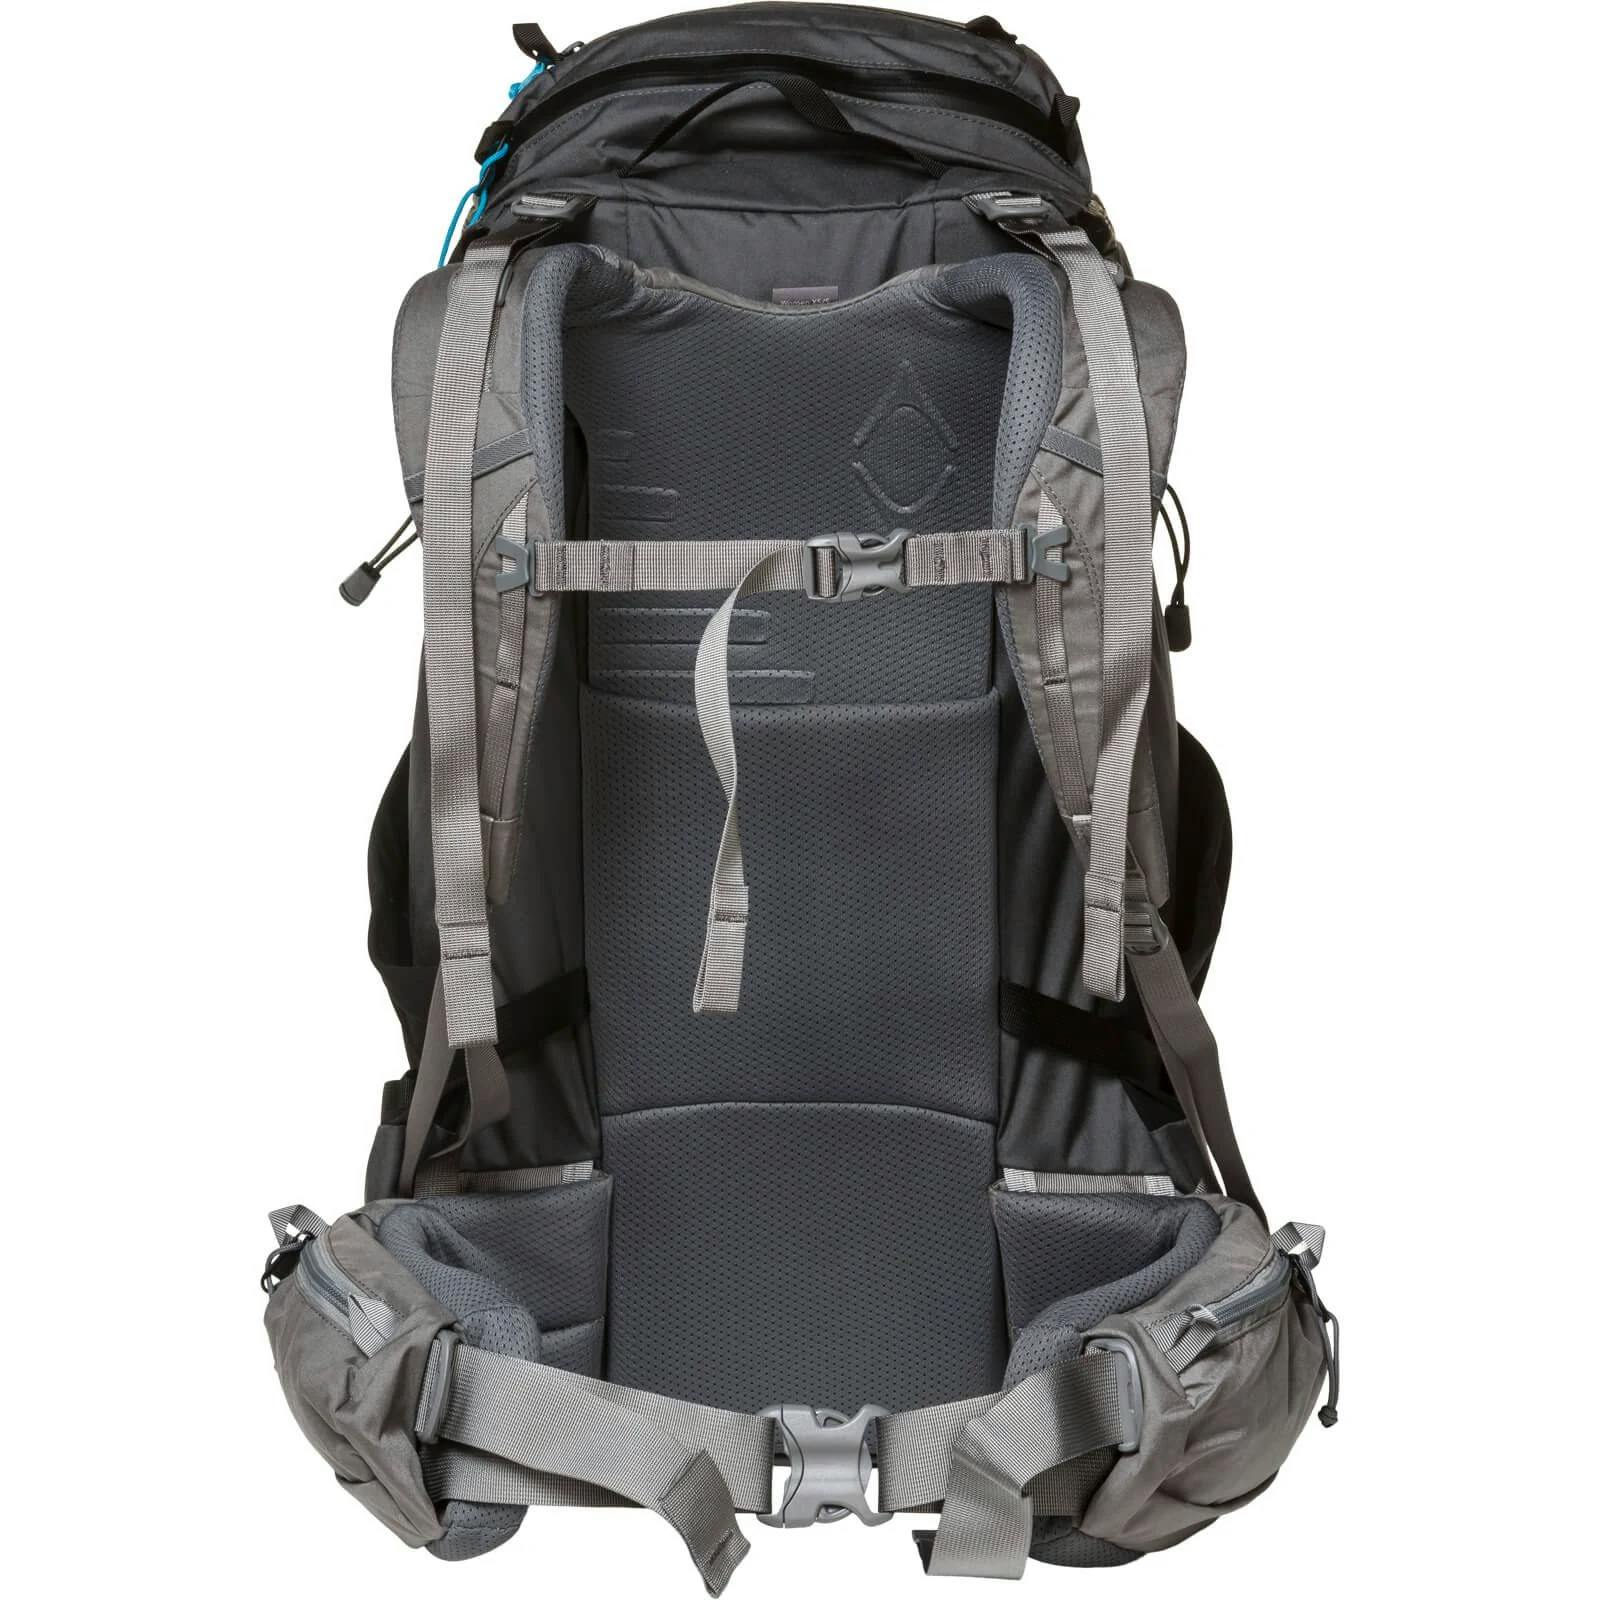 Mystery Ranch Coulee 40 Backpack- Women's · Shadow Moon